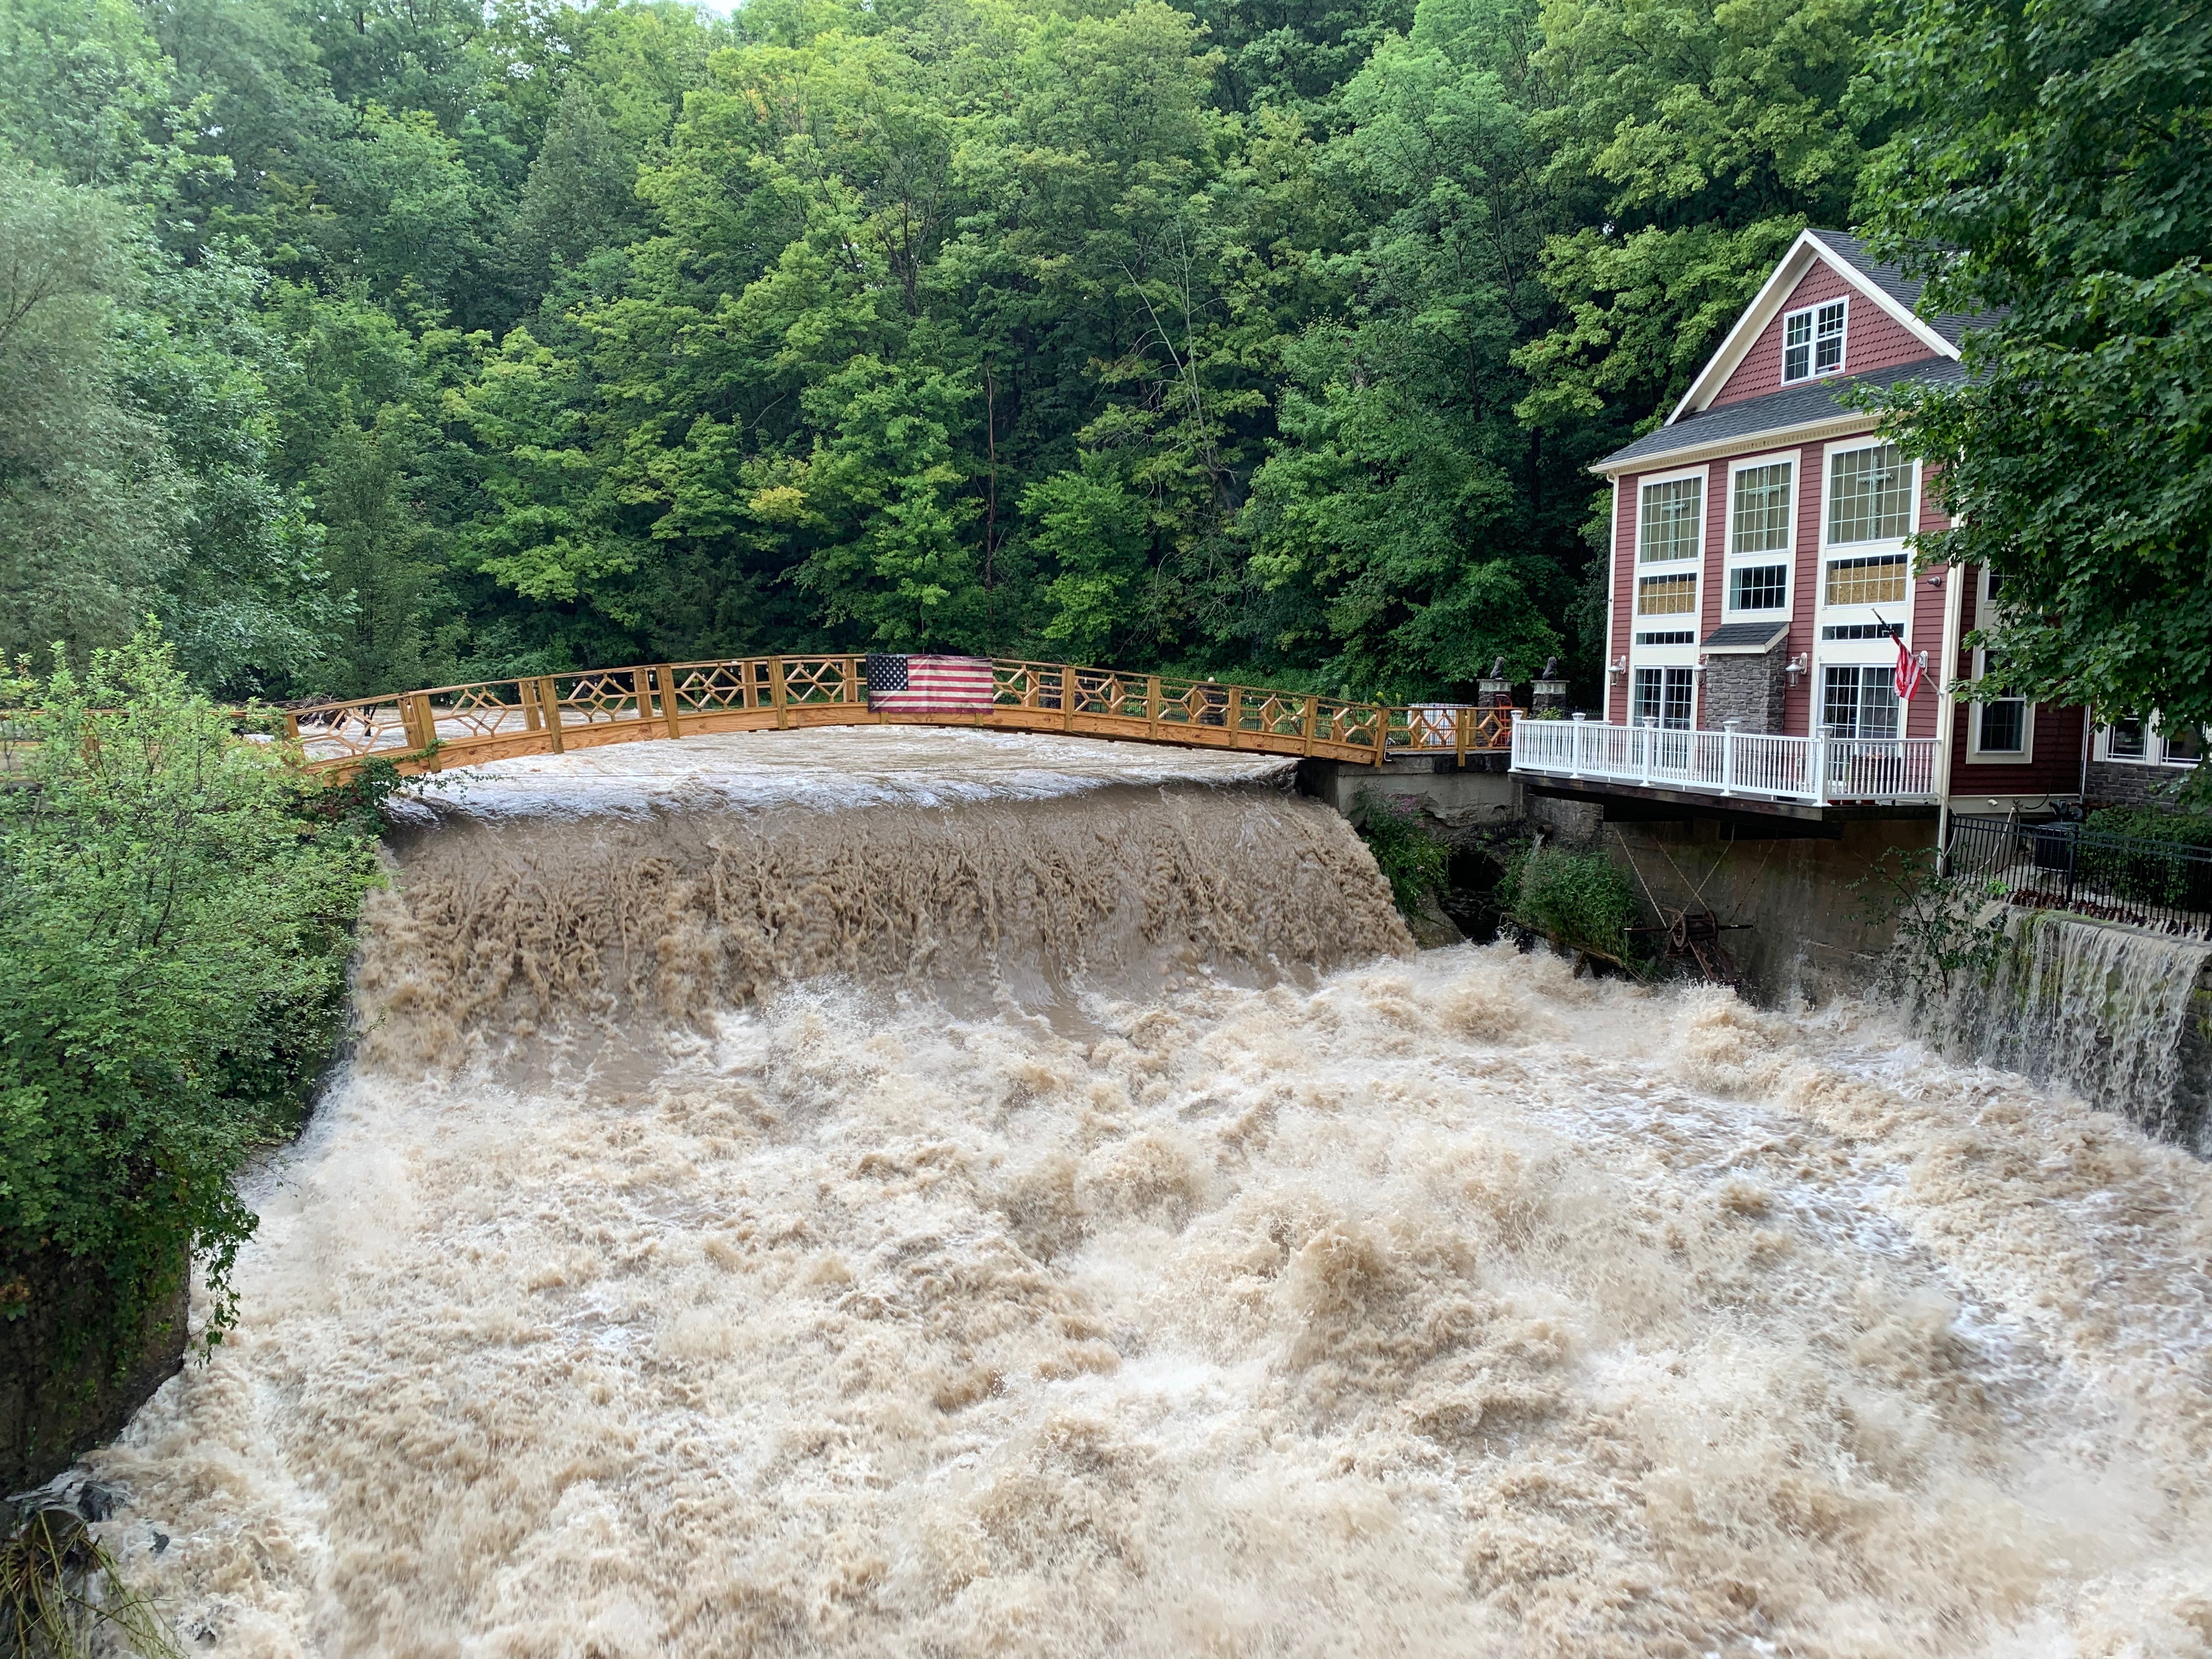 Ninemile Creek off Route 173 in the town of Marcellus on Thursday, Aug. 19, 2021.